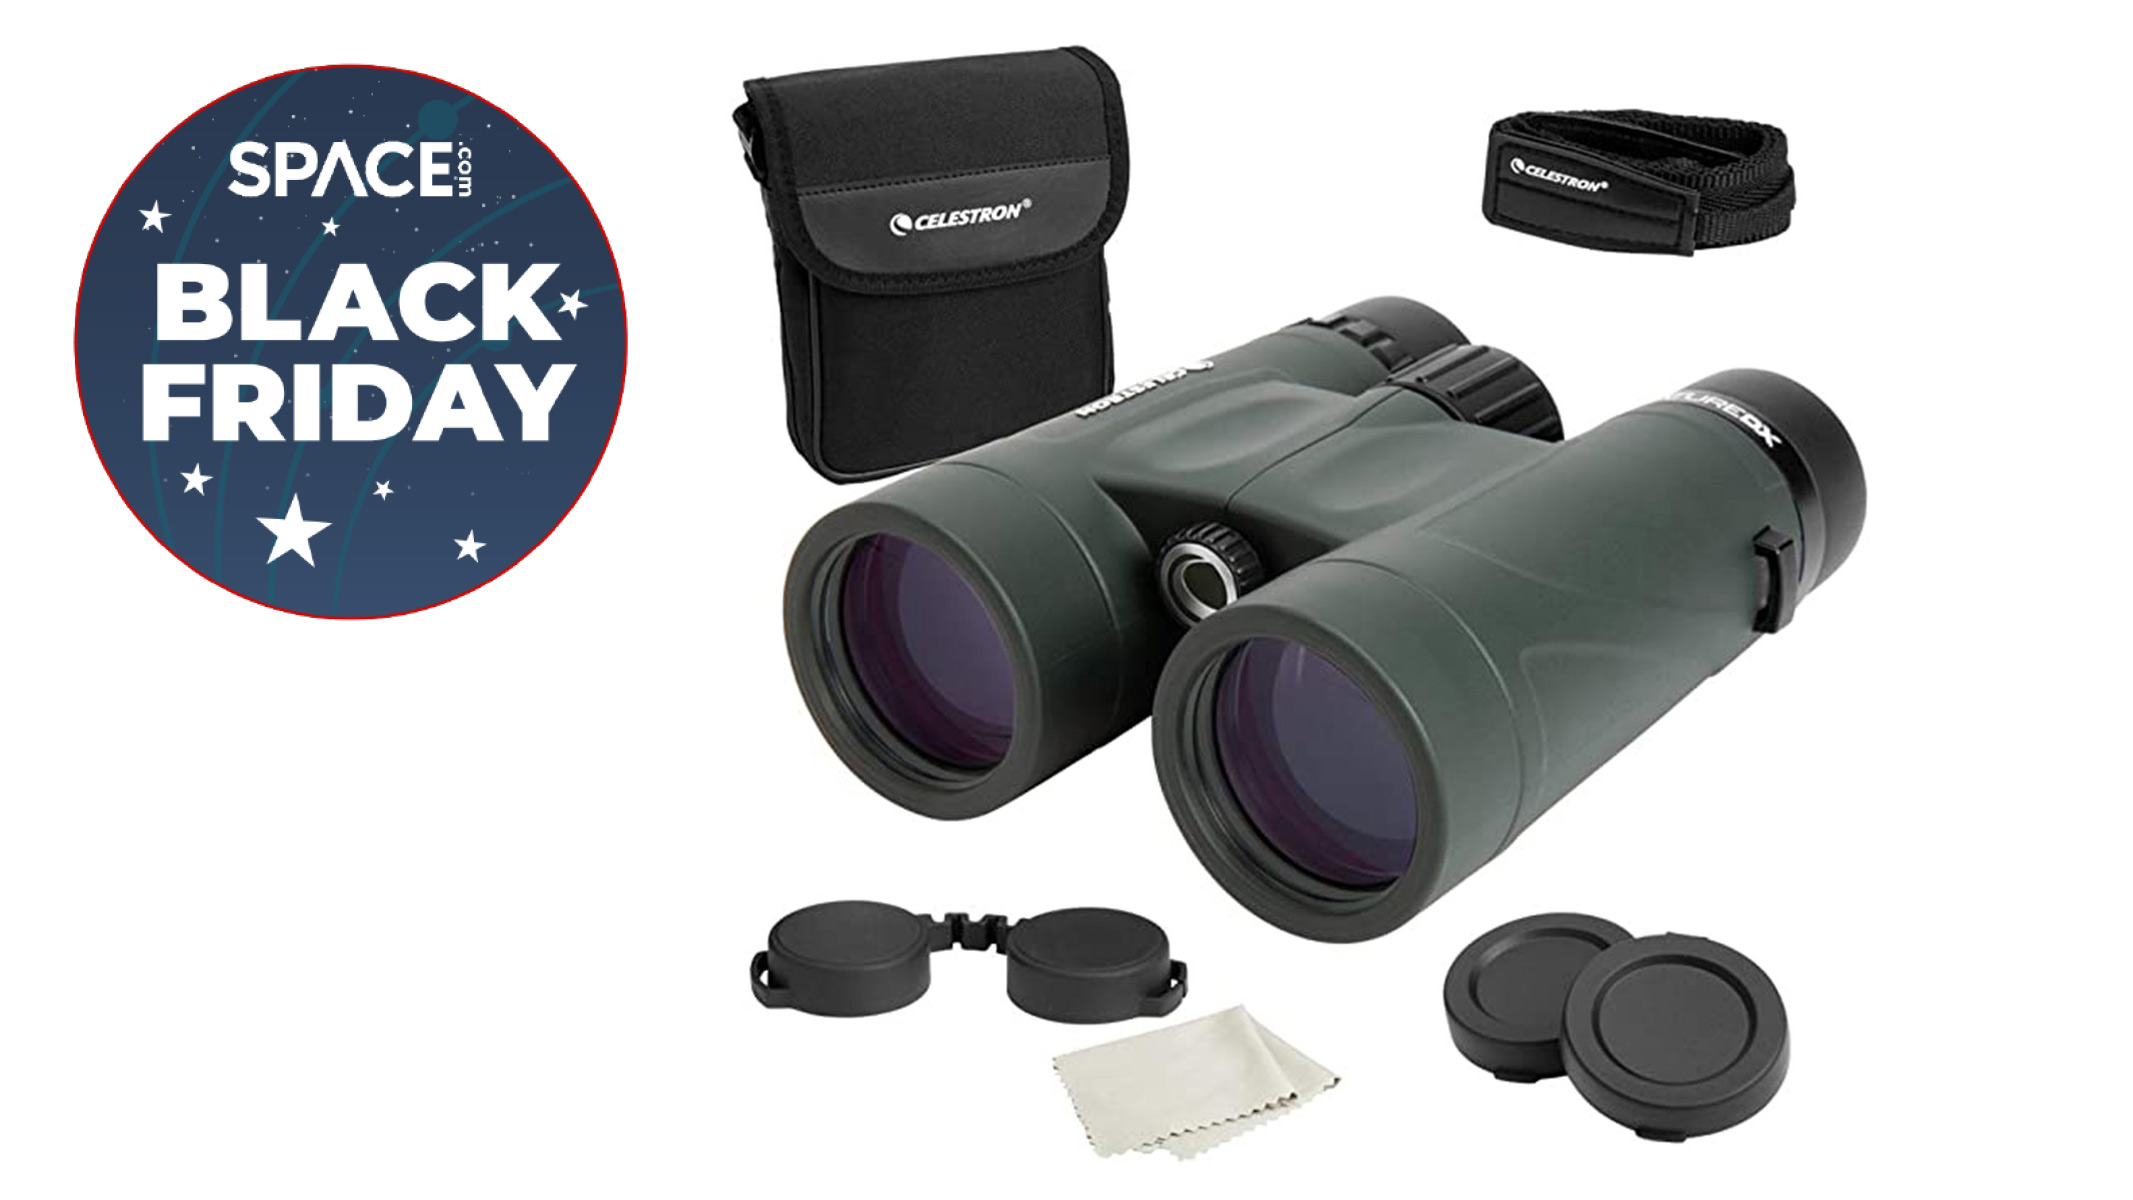 Charotar Globe Daily Celestron nature dx 8x42 binoculars on white background with black friday deal badge